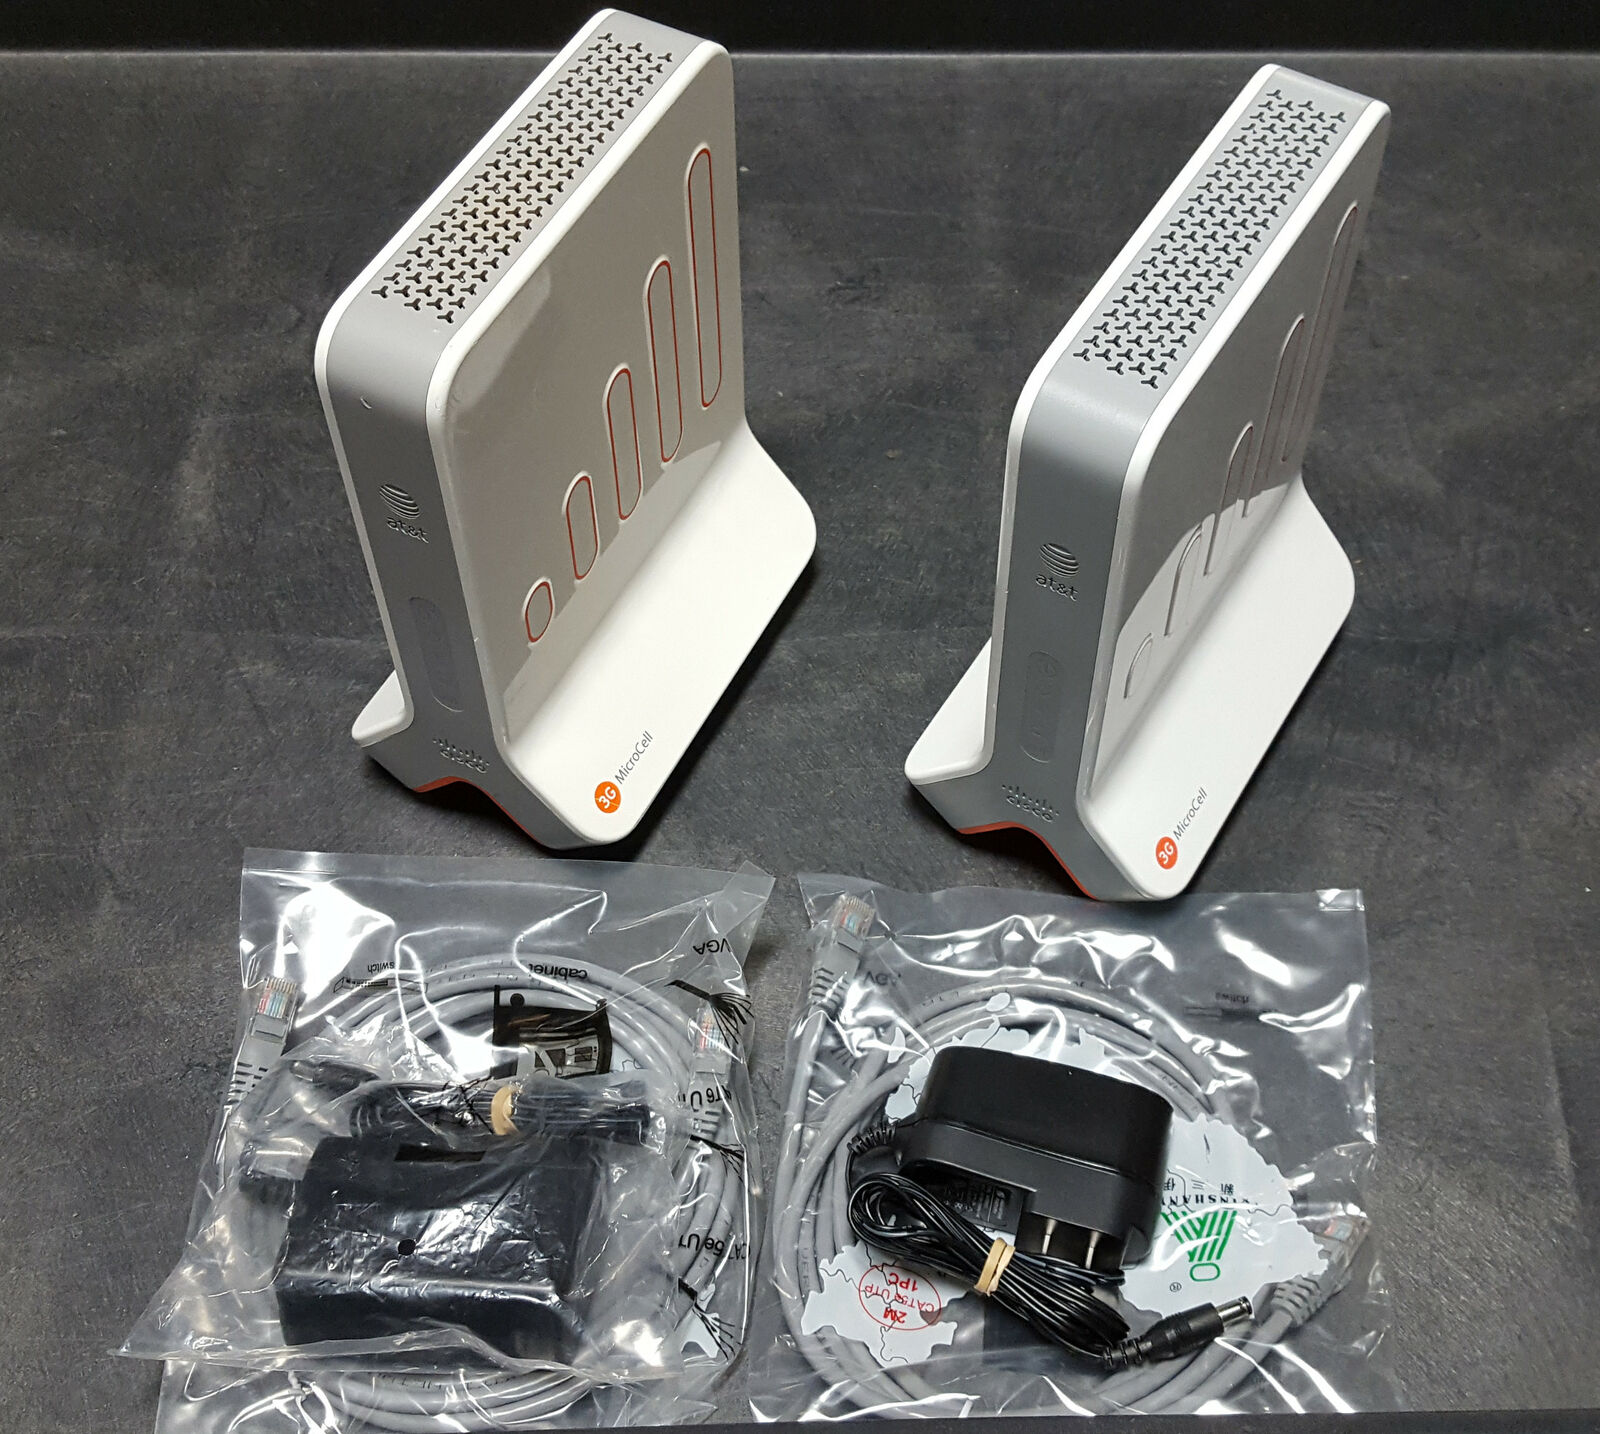 2x FOR PARTS AT&T Cisqo Microcell Wireless 3G Cell Signal Booster Antennas READ